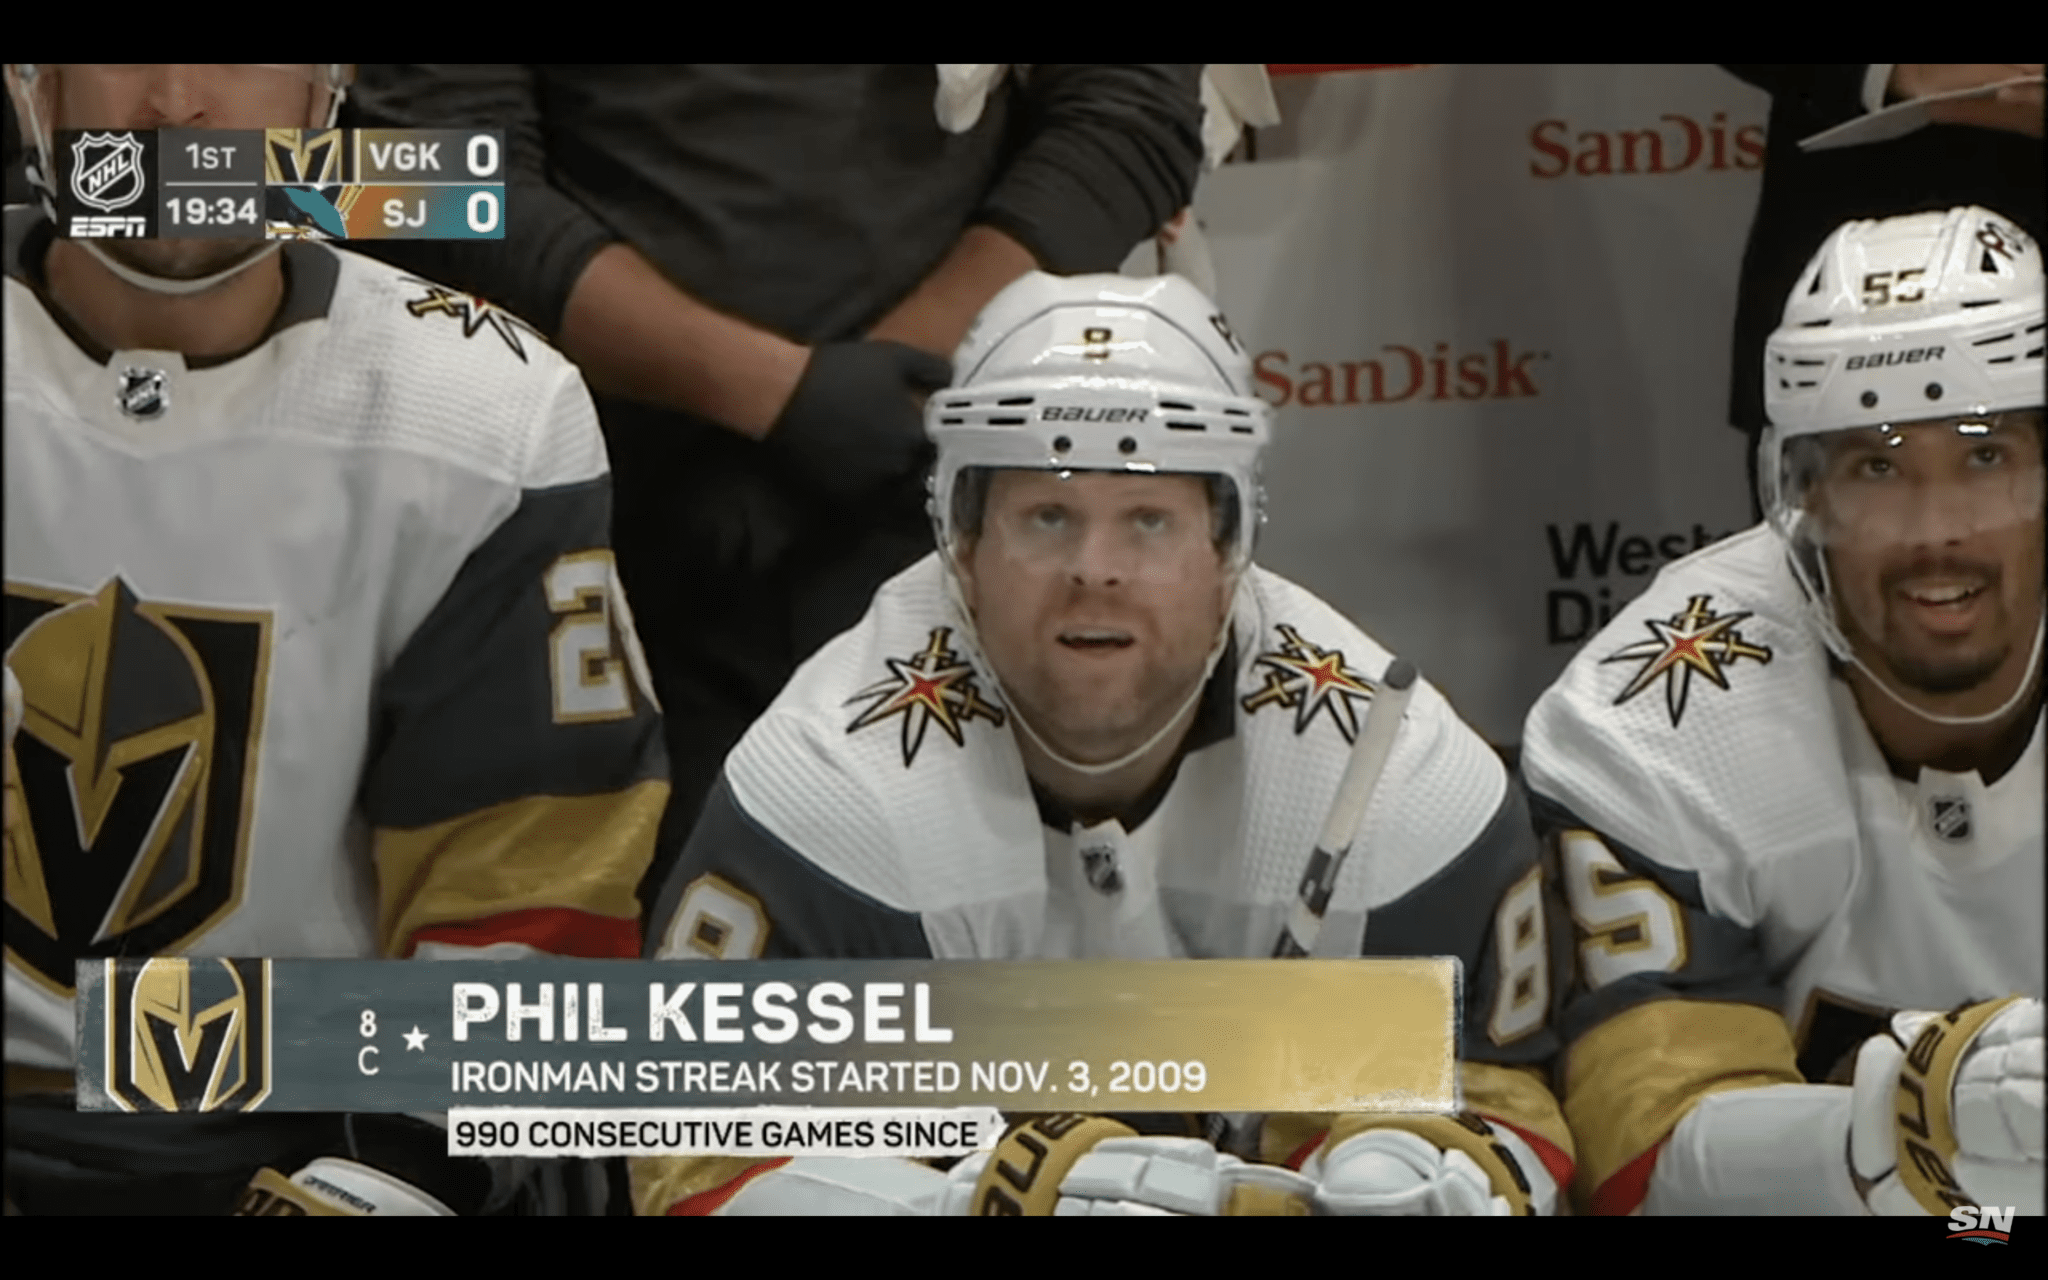 Phil Kessel of Golden Knights set to become NHL's iron man, Golden Knights